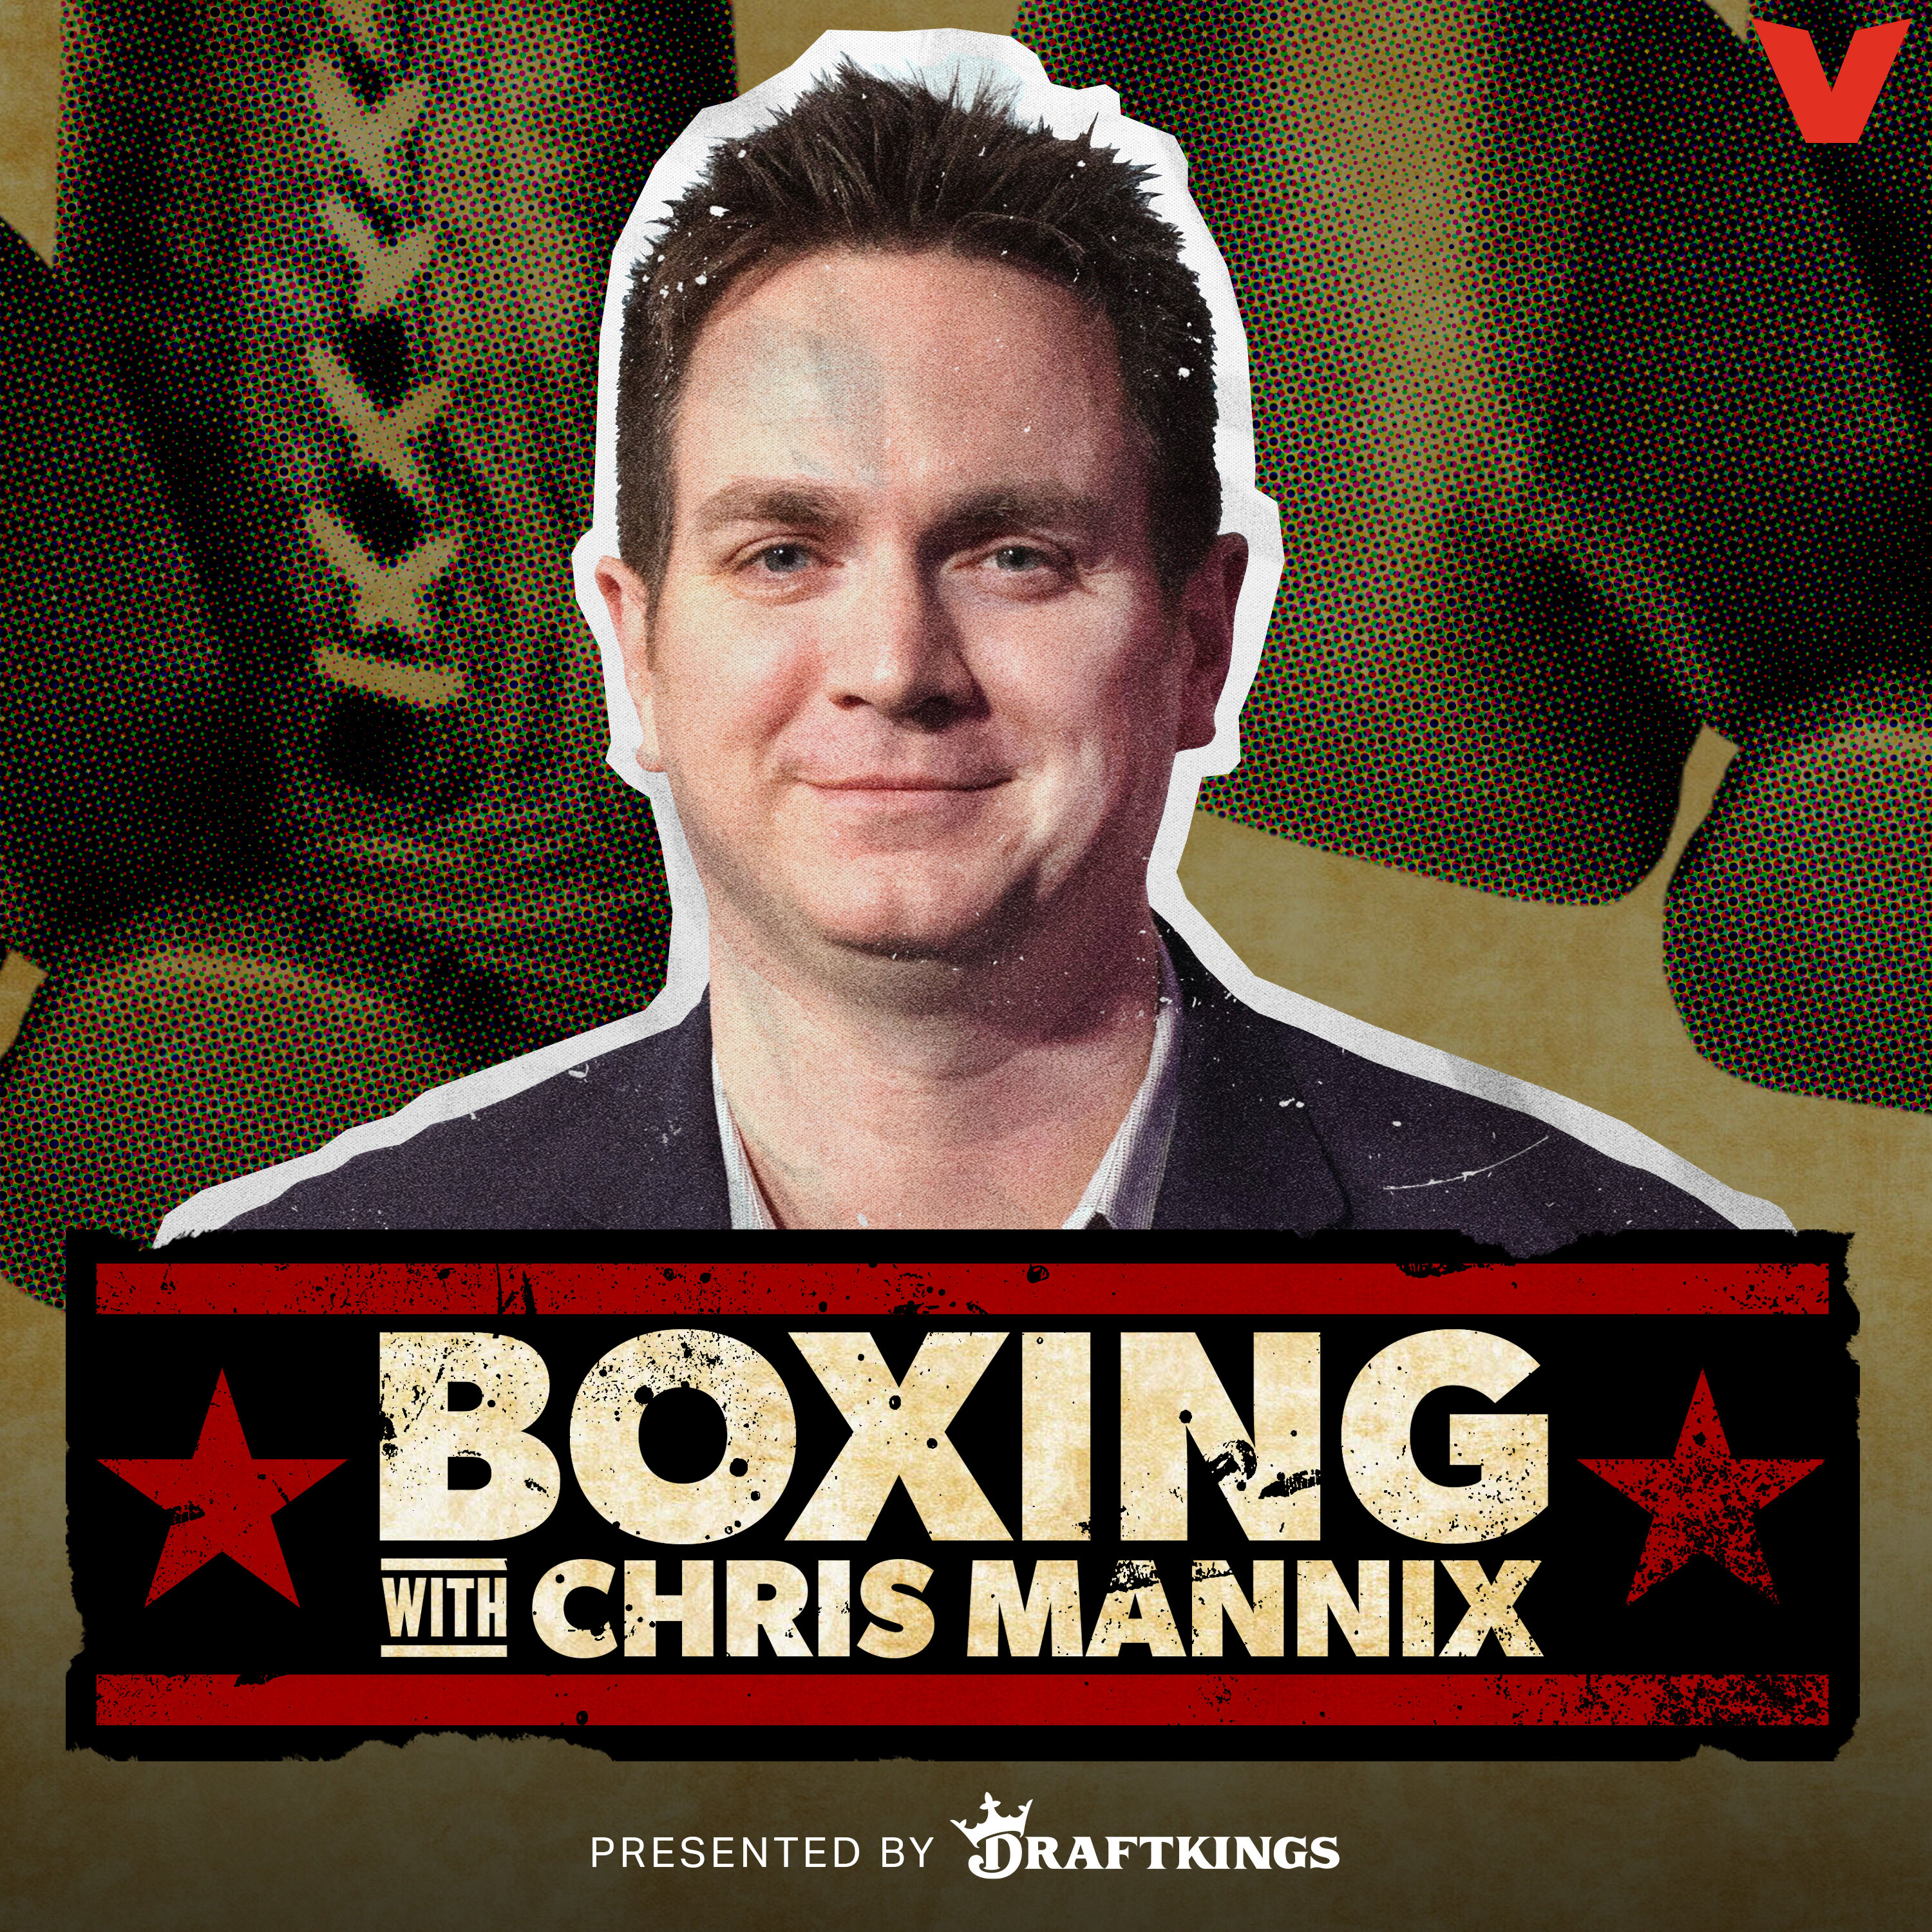 Boxing with Chris Mannix - A Bloodbath in Vegas